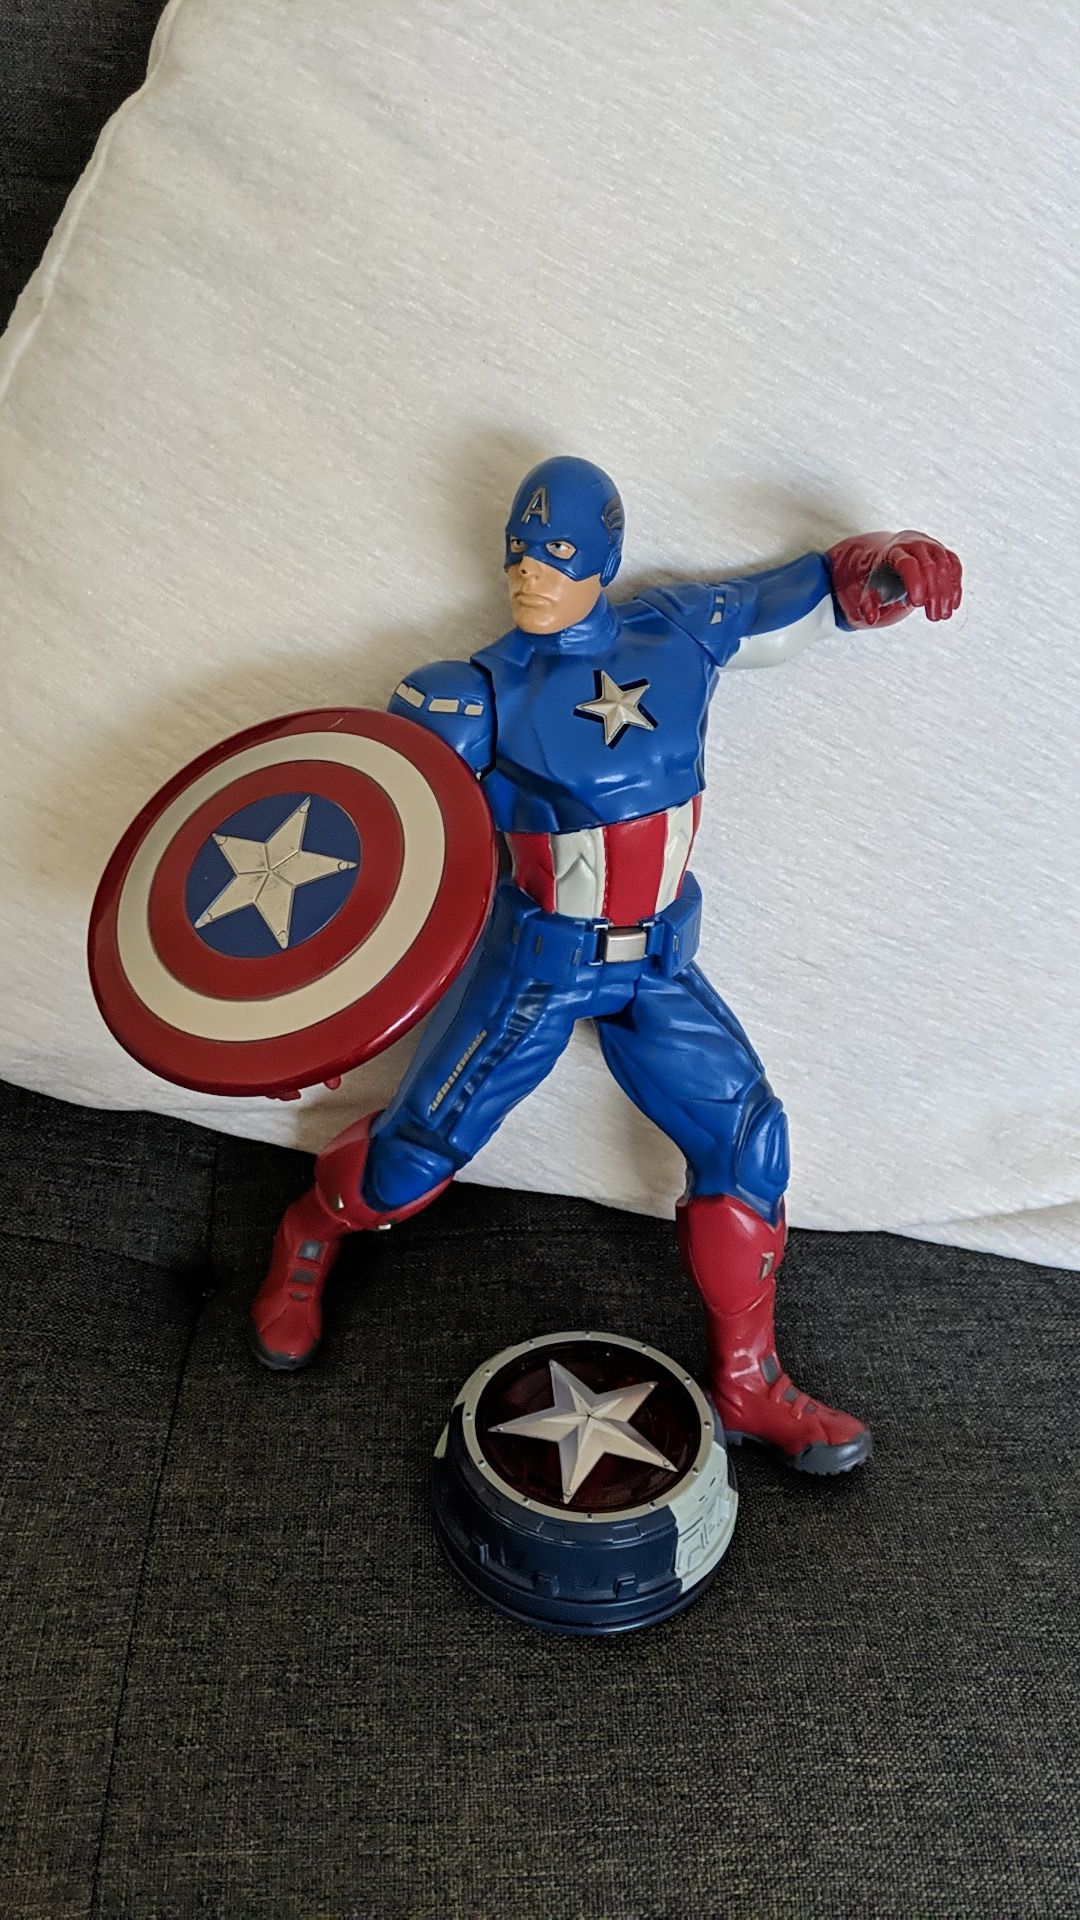 Captain America action figure and pillow